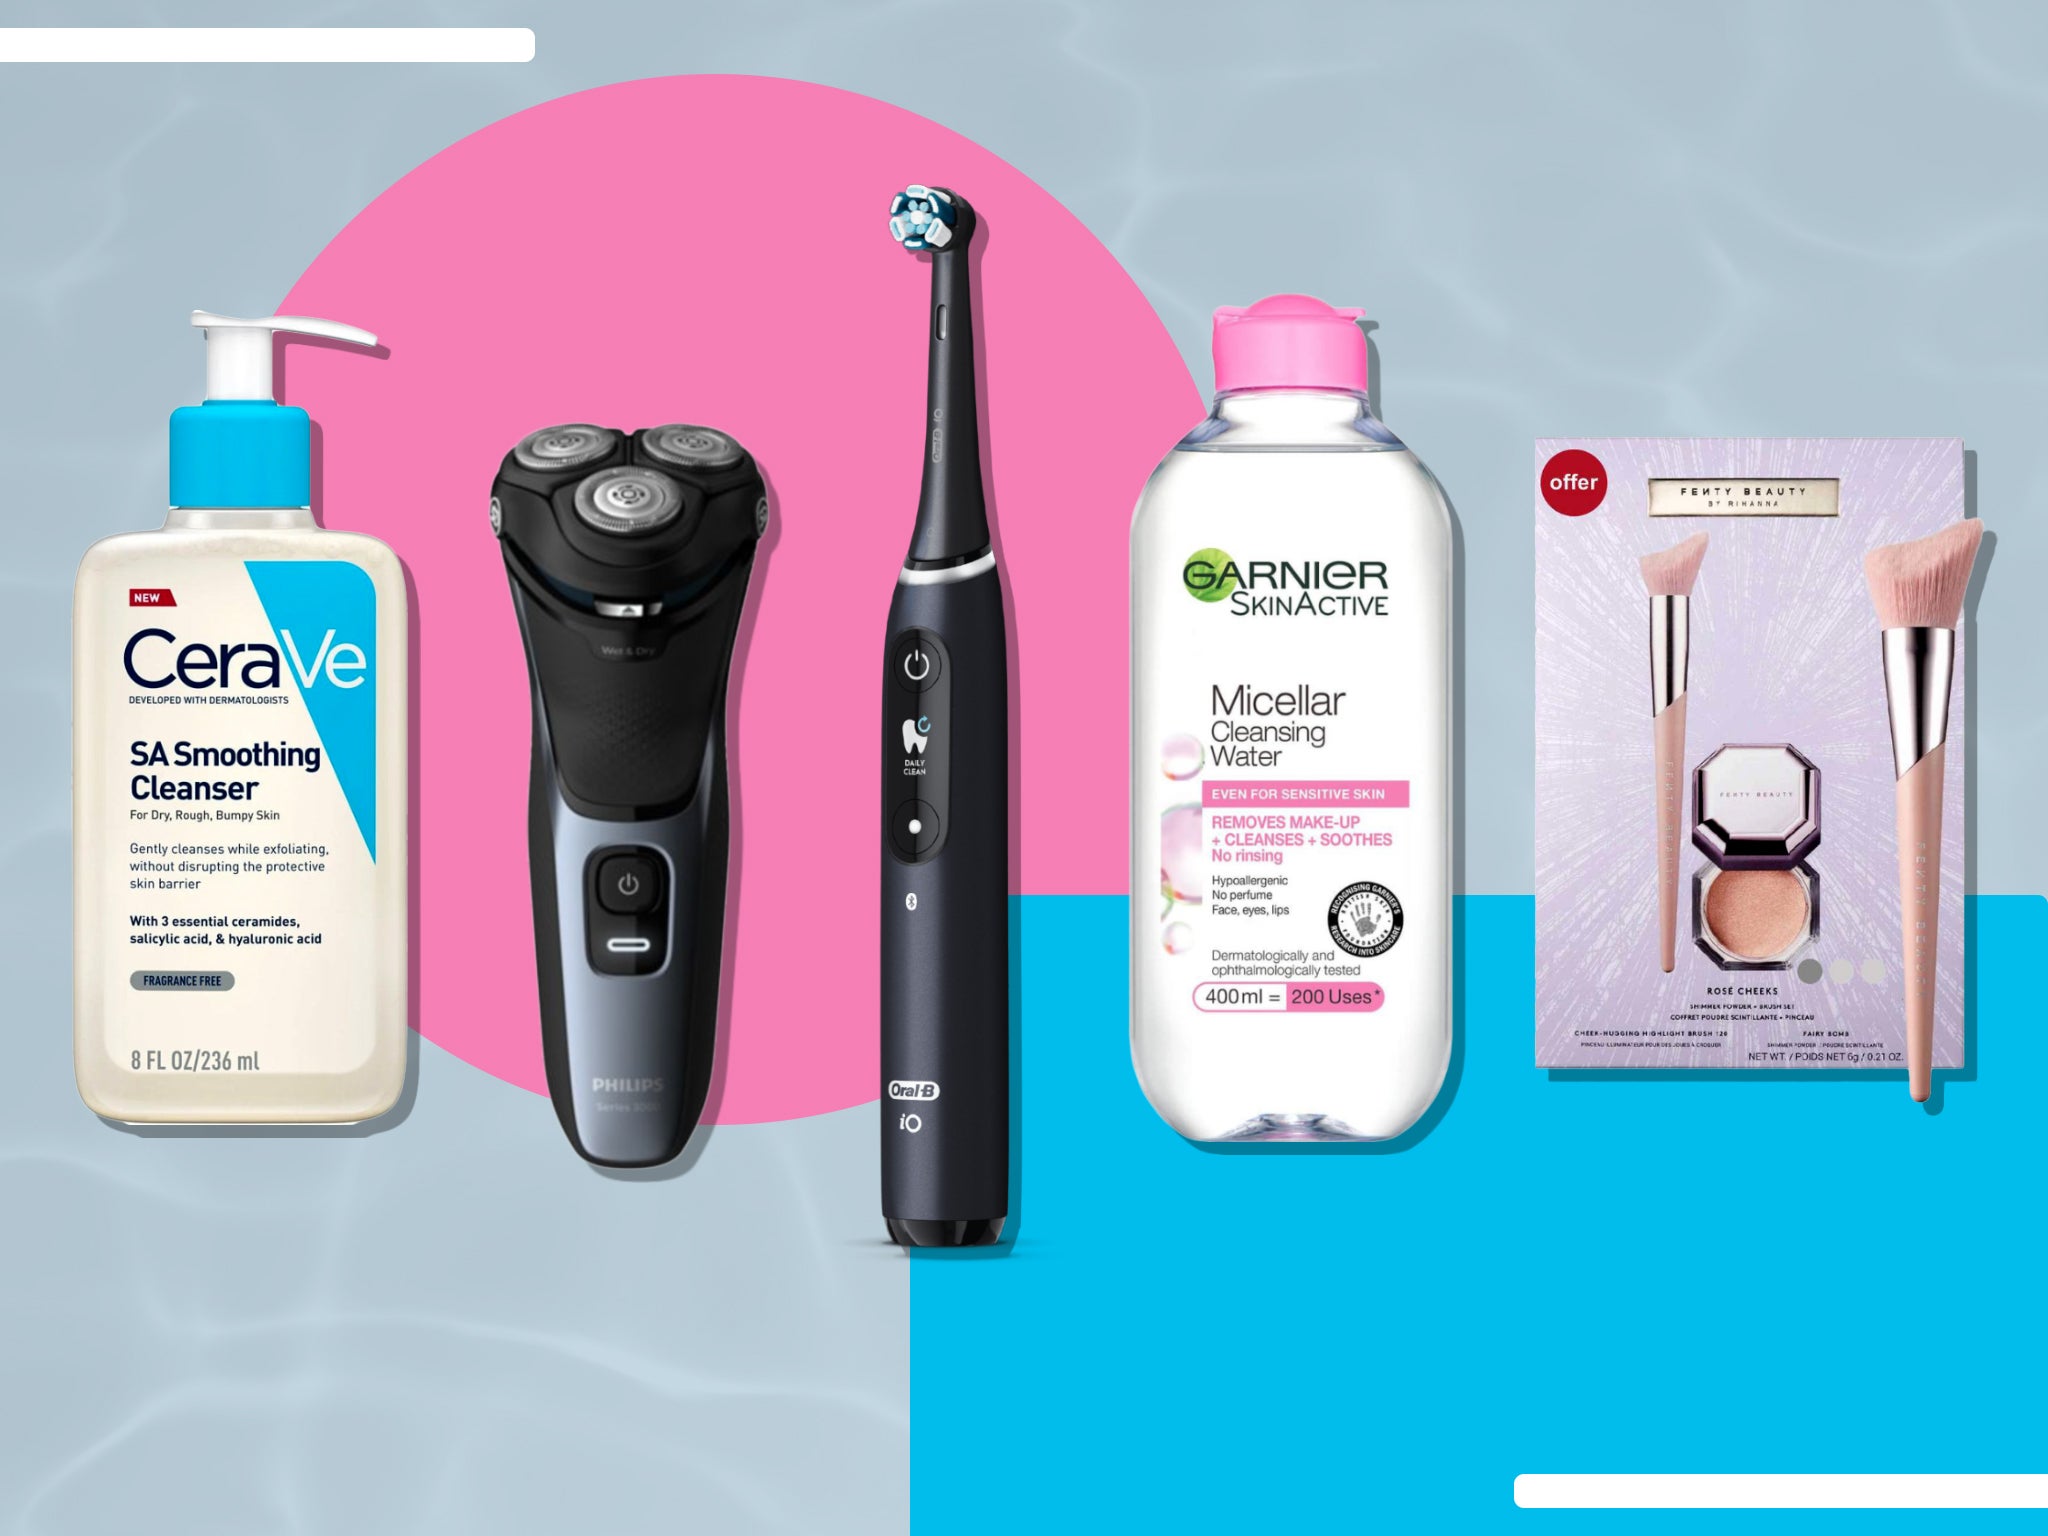 There’s discounts across beauty, electronics, skincare and more